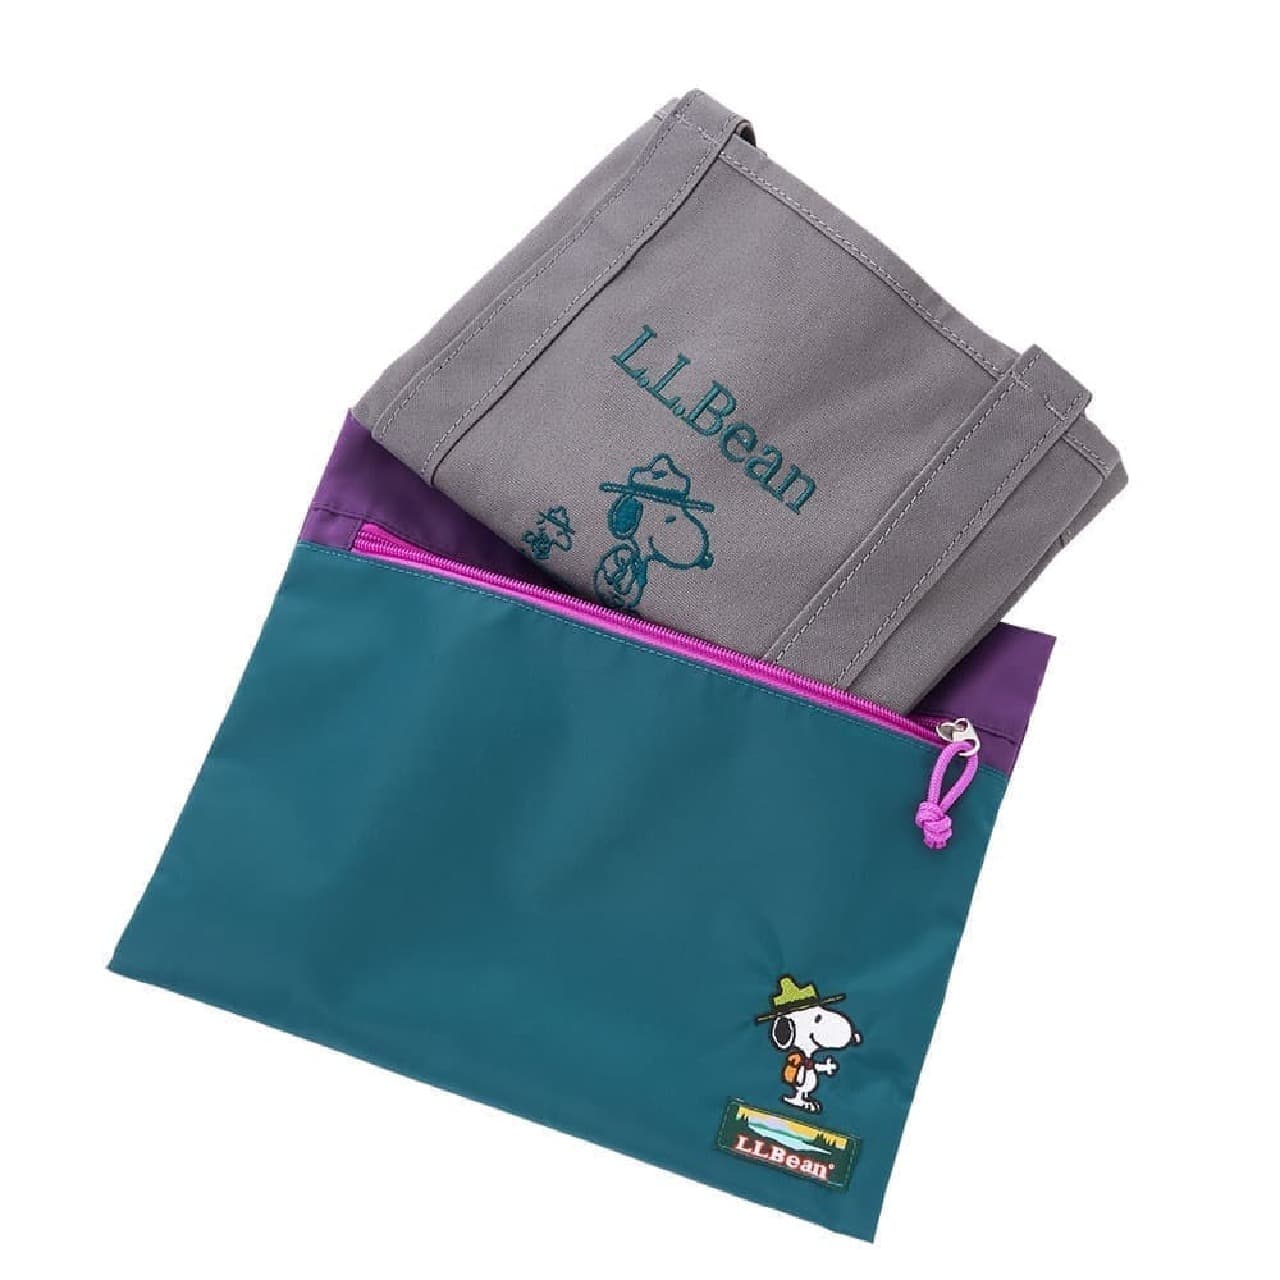 PLAZA online store limited Snoopy tote bag